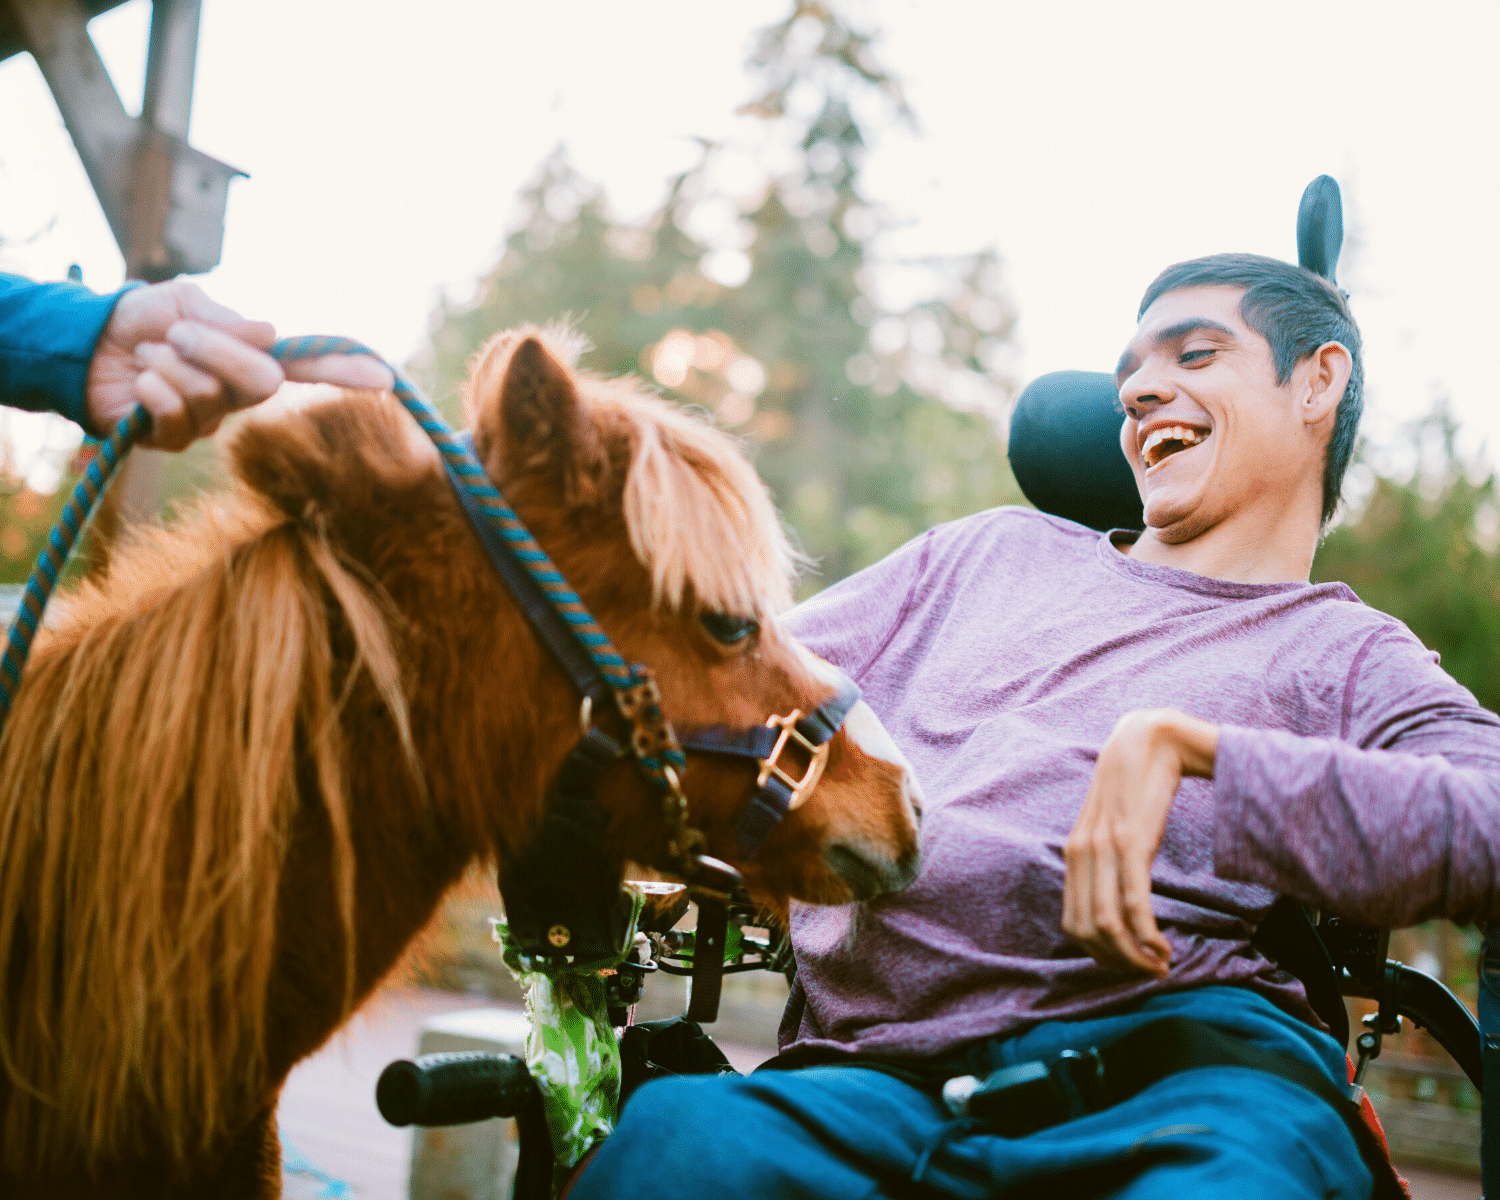 A person in a wheelchair interacts with a miniature horse in a park.